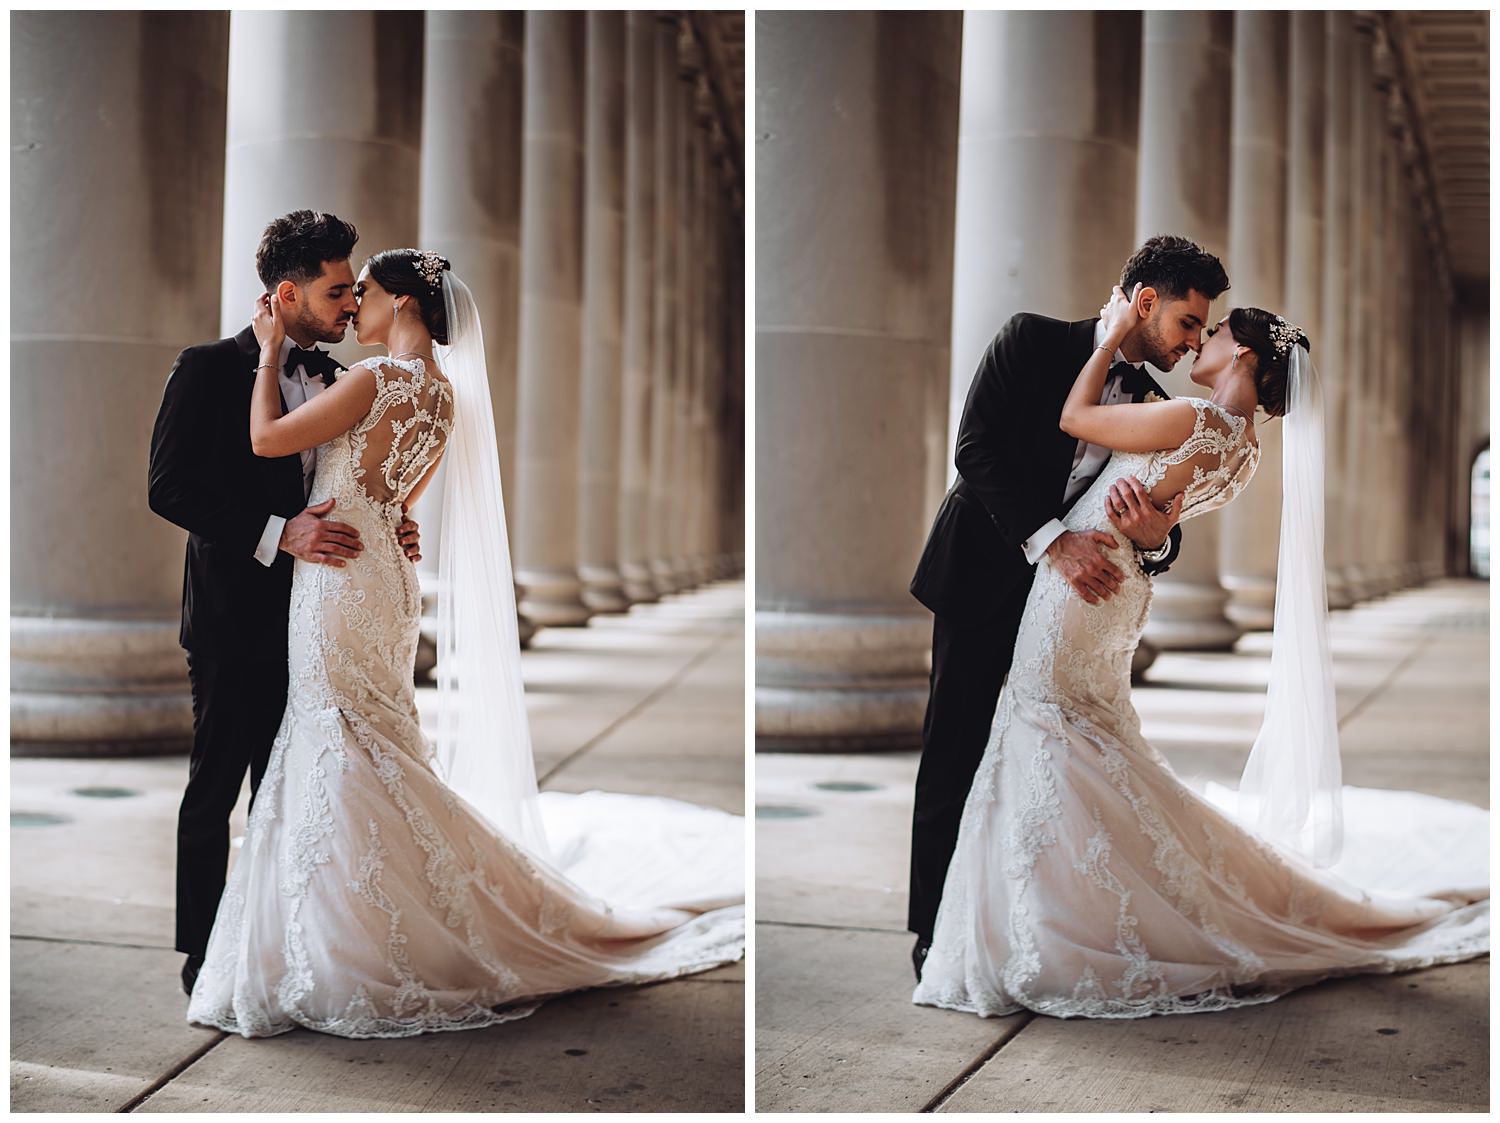 bride and groom photo session at the Union Station - The Adamkovi photography